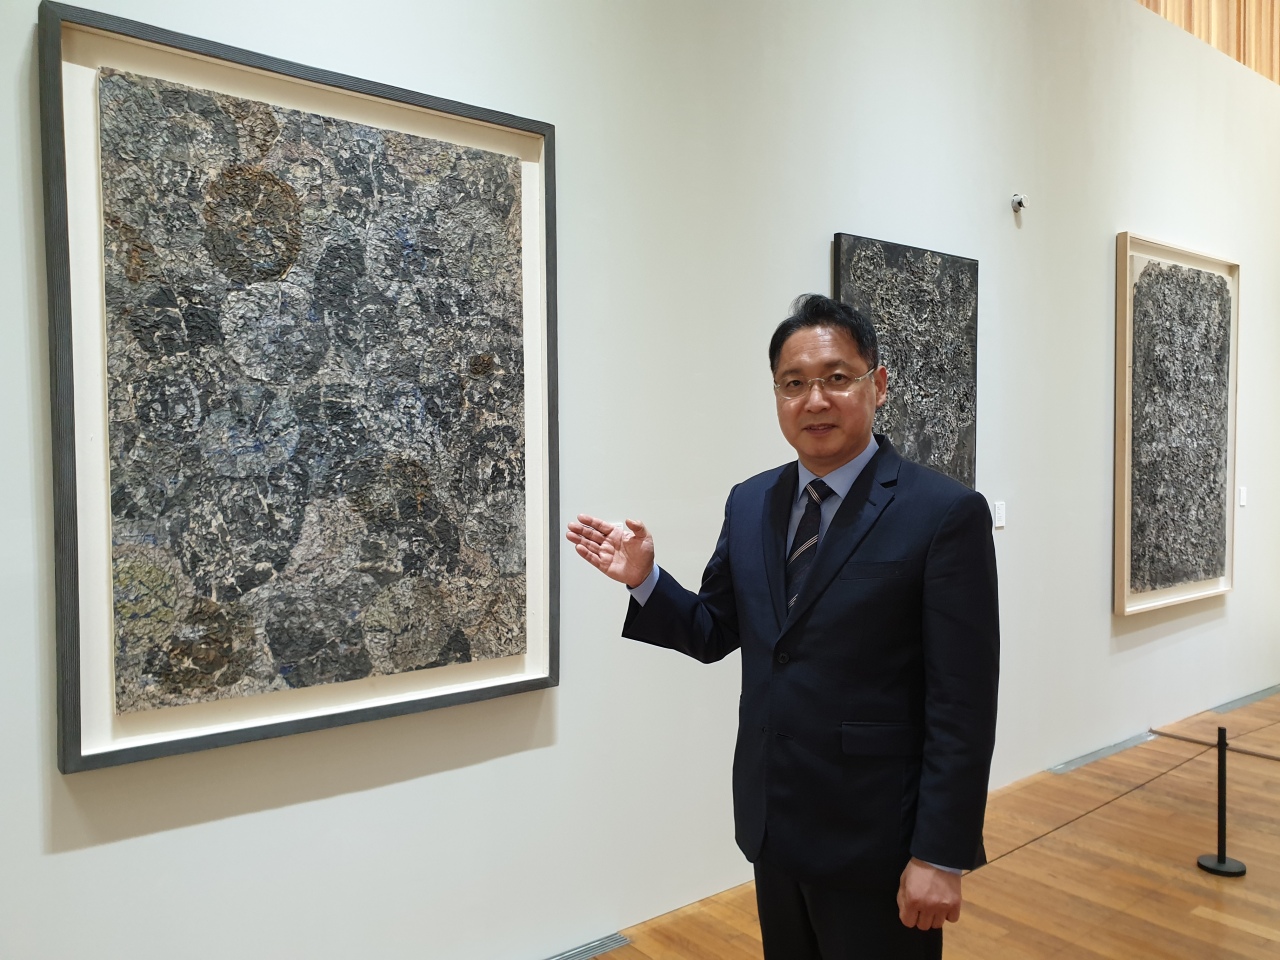 Ryu Chul-ha, director of Lee Ungno Museum, poses at the exhibition “Lee Ungno, Paintings made from Paper” at the museum in Daejeon, on June 2. (Park Yuna/The Korea Herald)